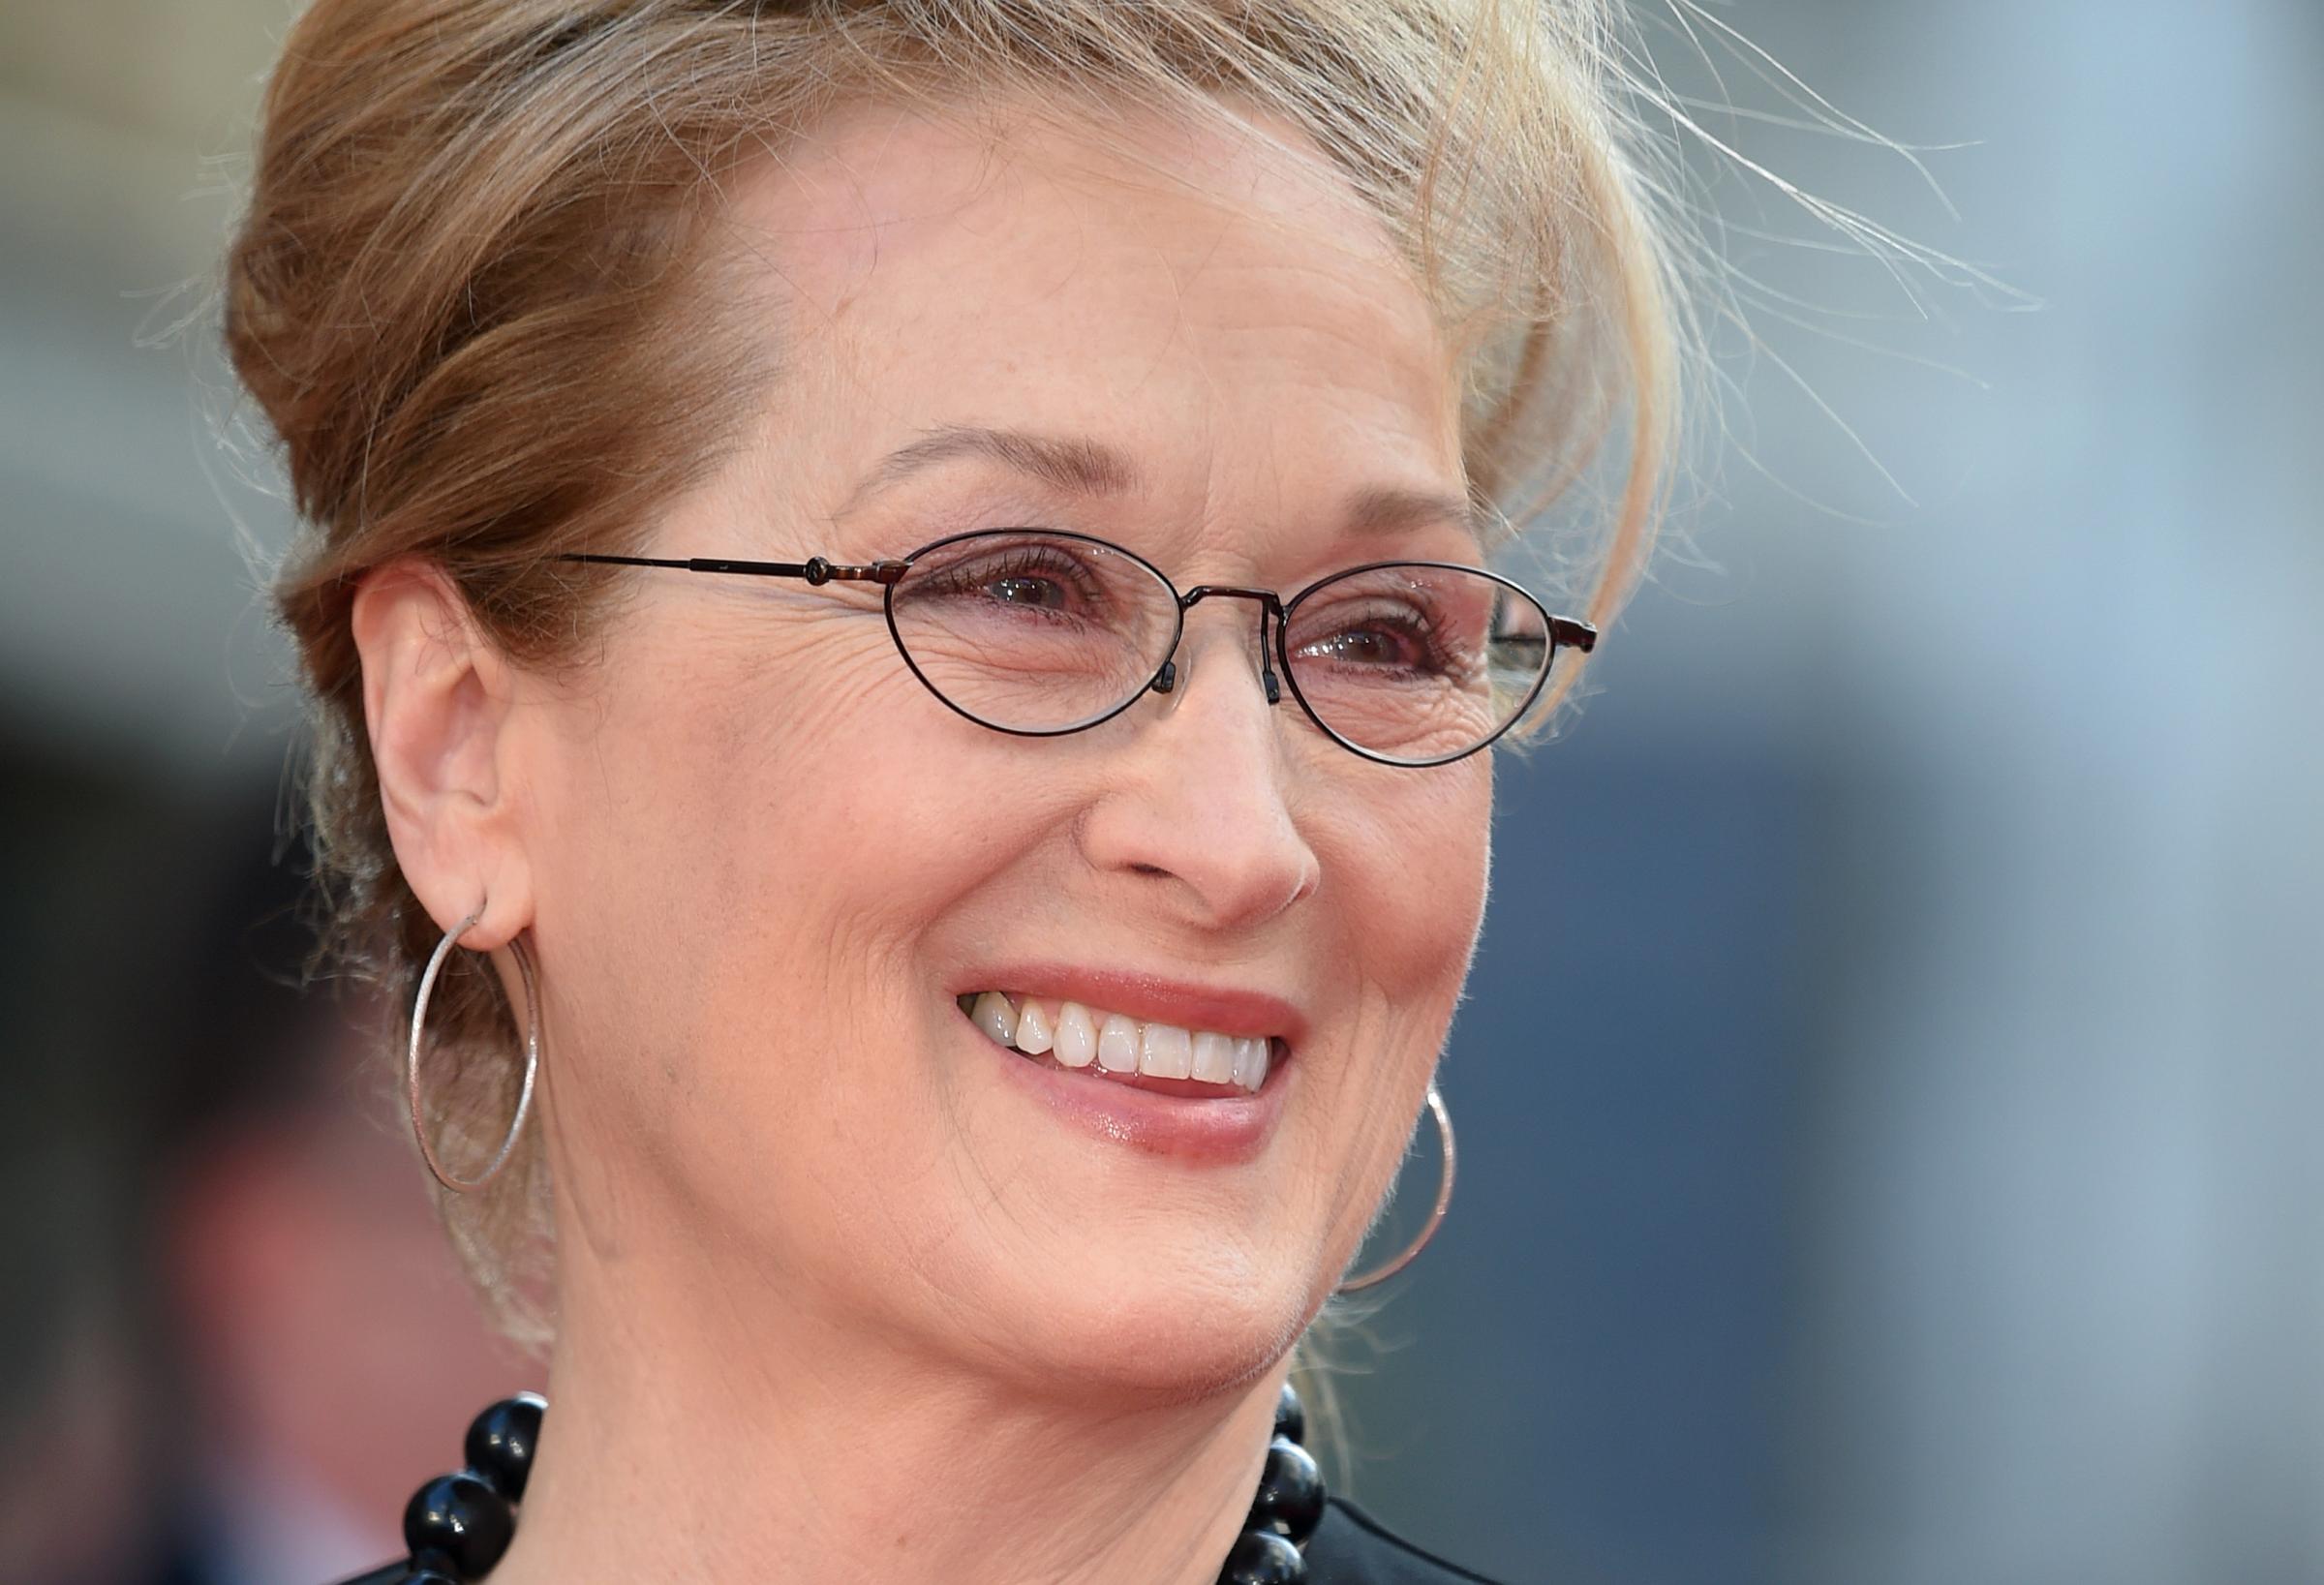 Meryl Streep arrives for the UK film premiere of "Florence Foster Jenkins" at Odeon Leicester Square on April 12, 2016 in London, England.